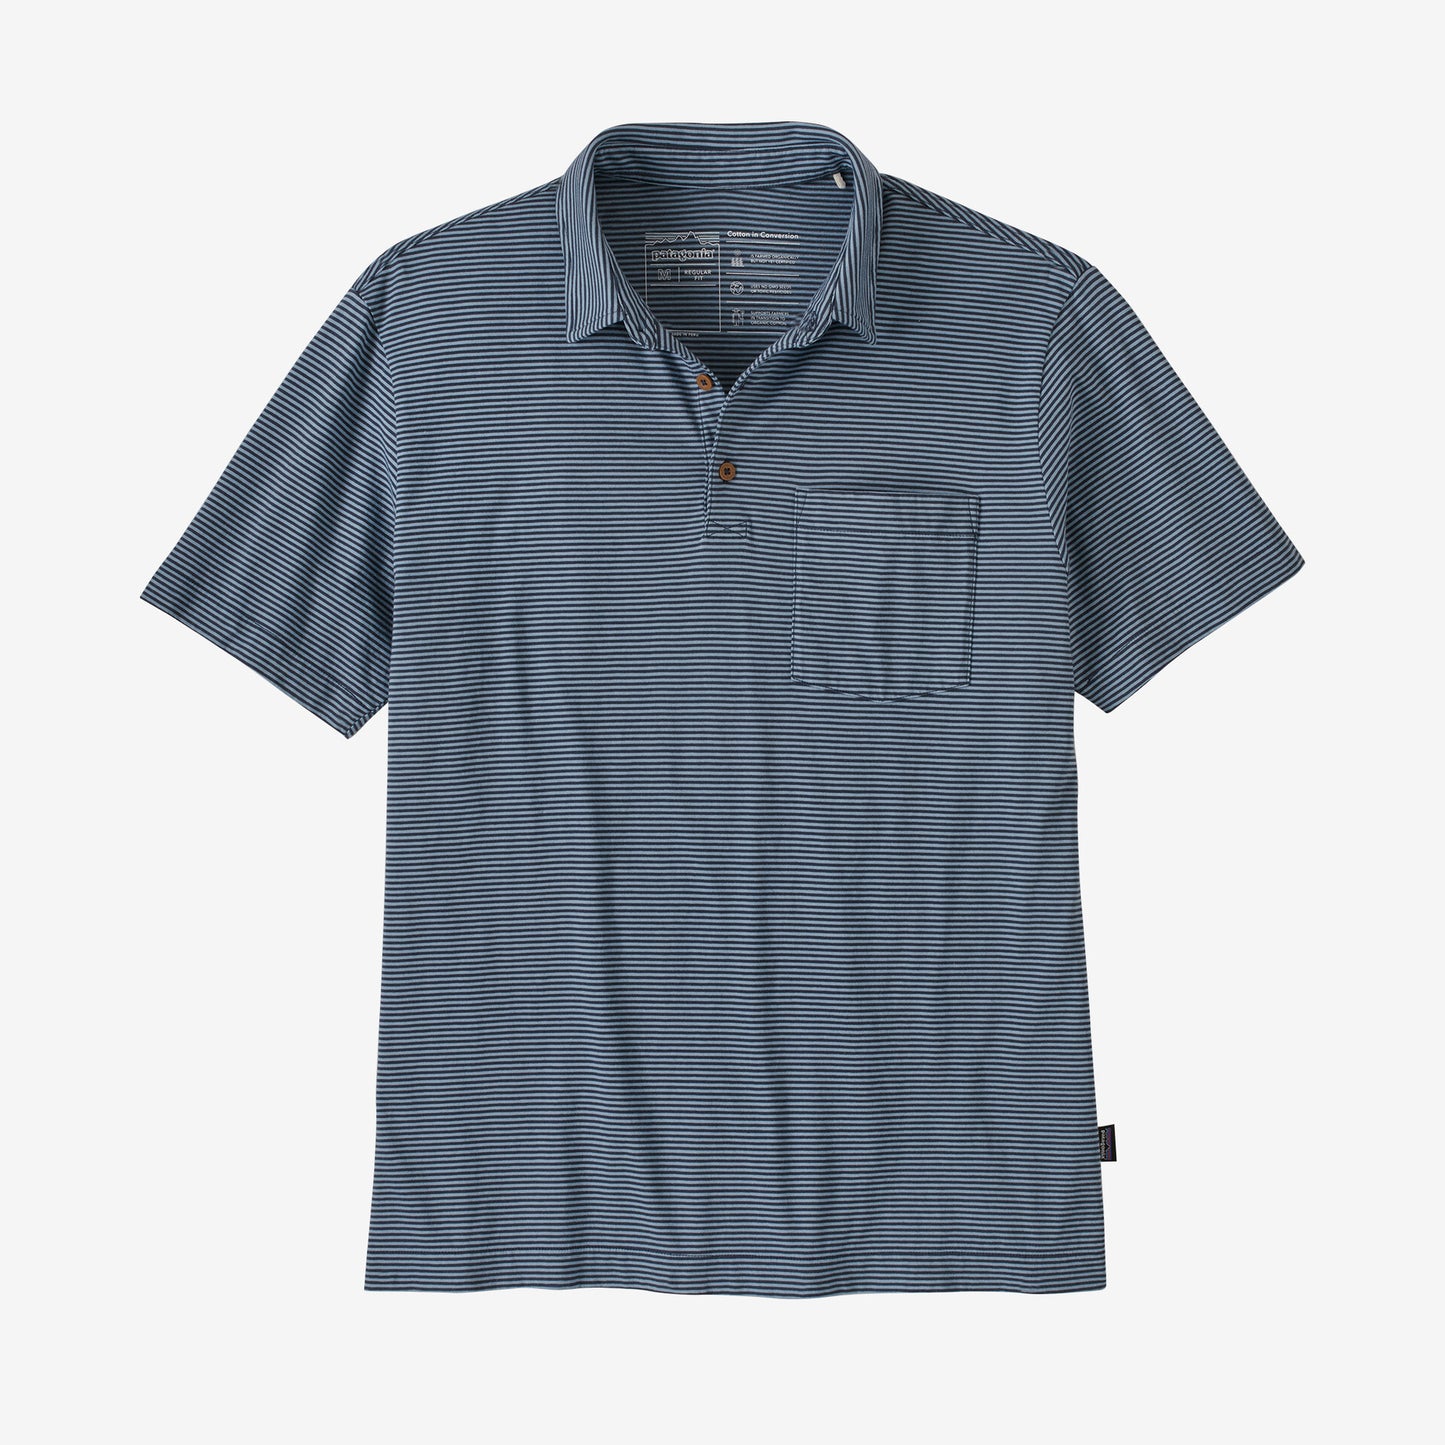 Cotton in Conversion Lightweight Polo Shirt